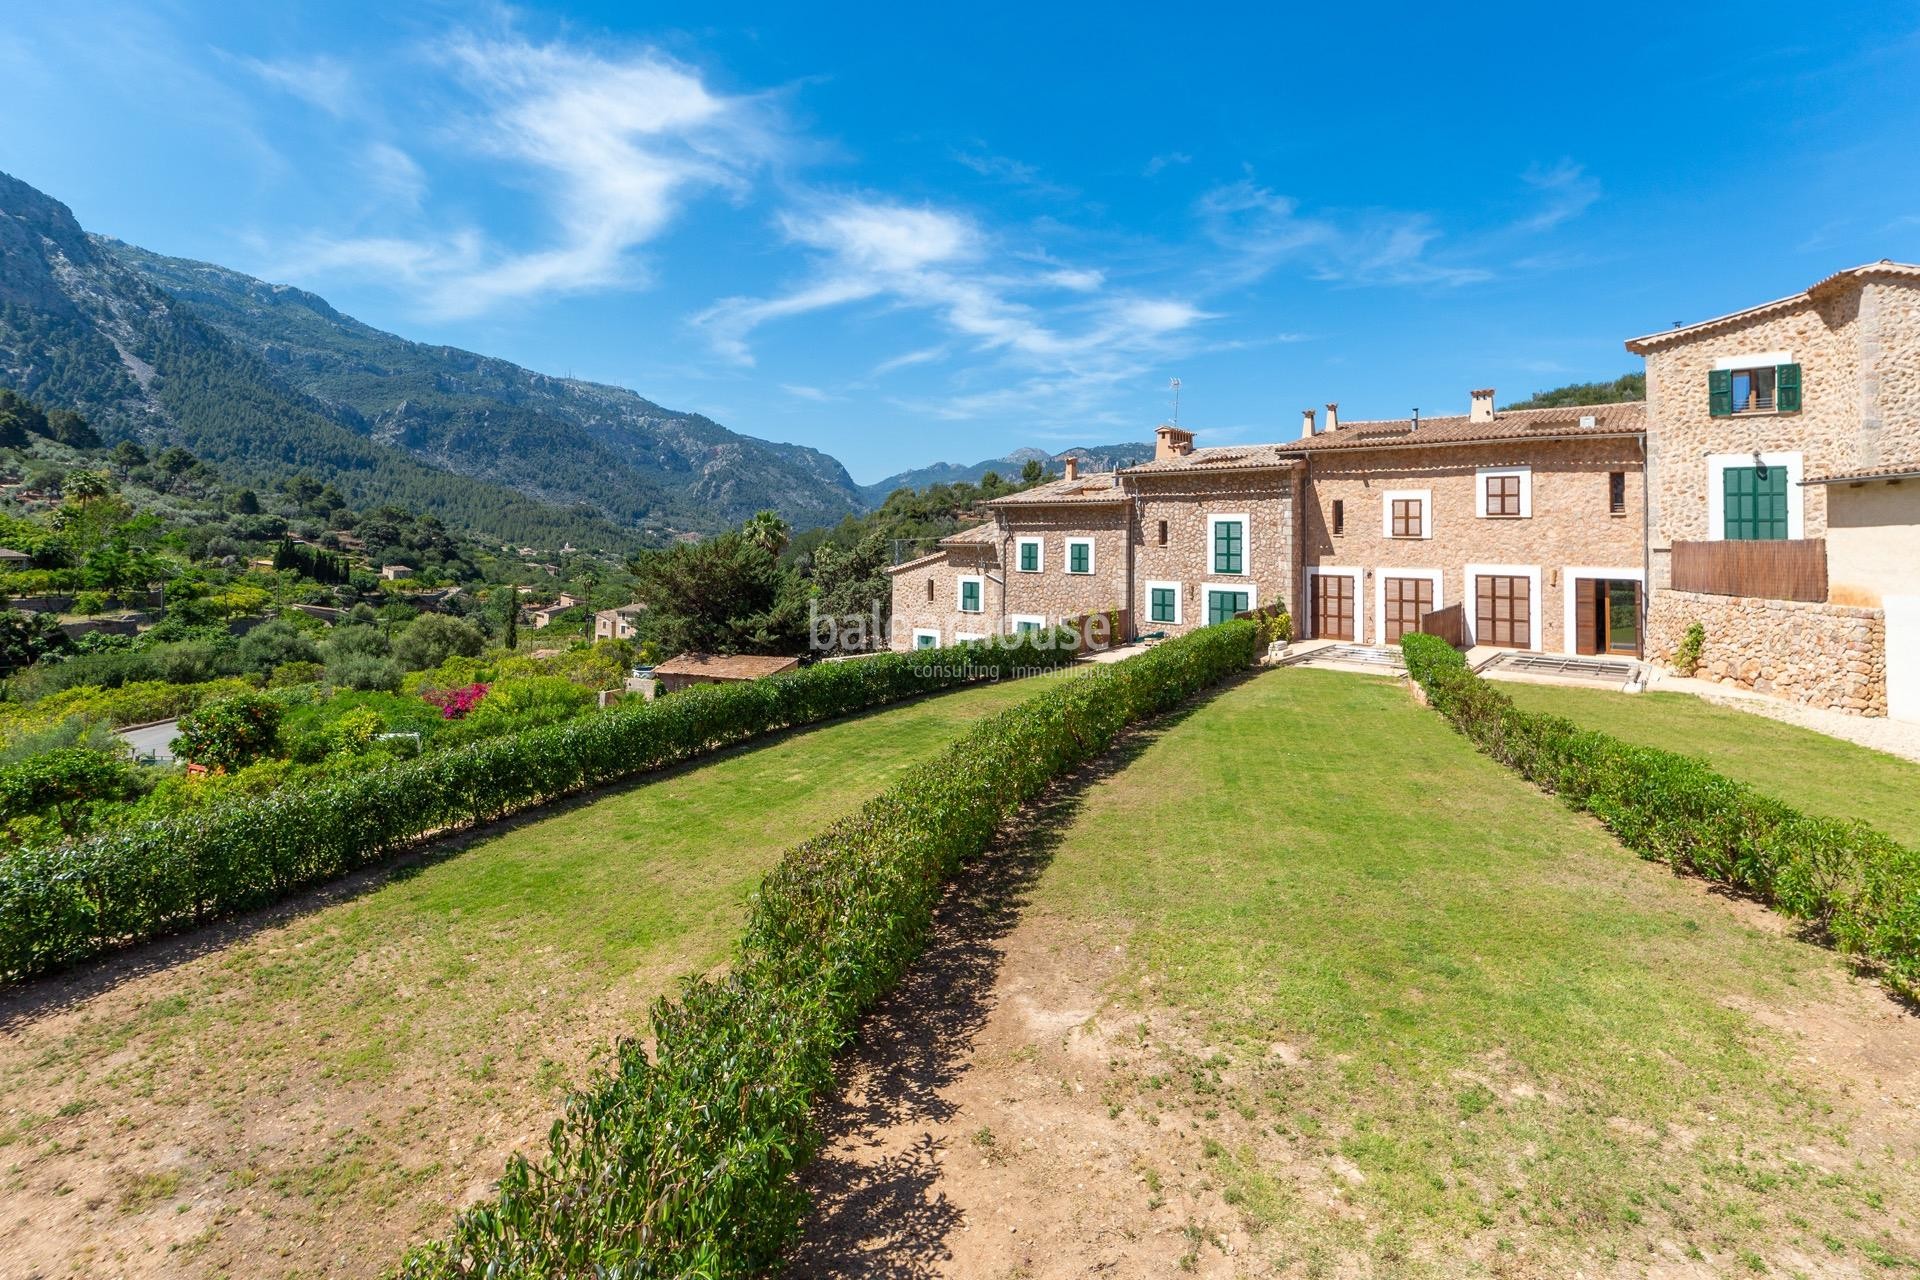 Fantastic new villa in Fornalutx with pool and stunning views of the Tramuntana